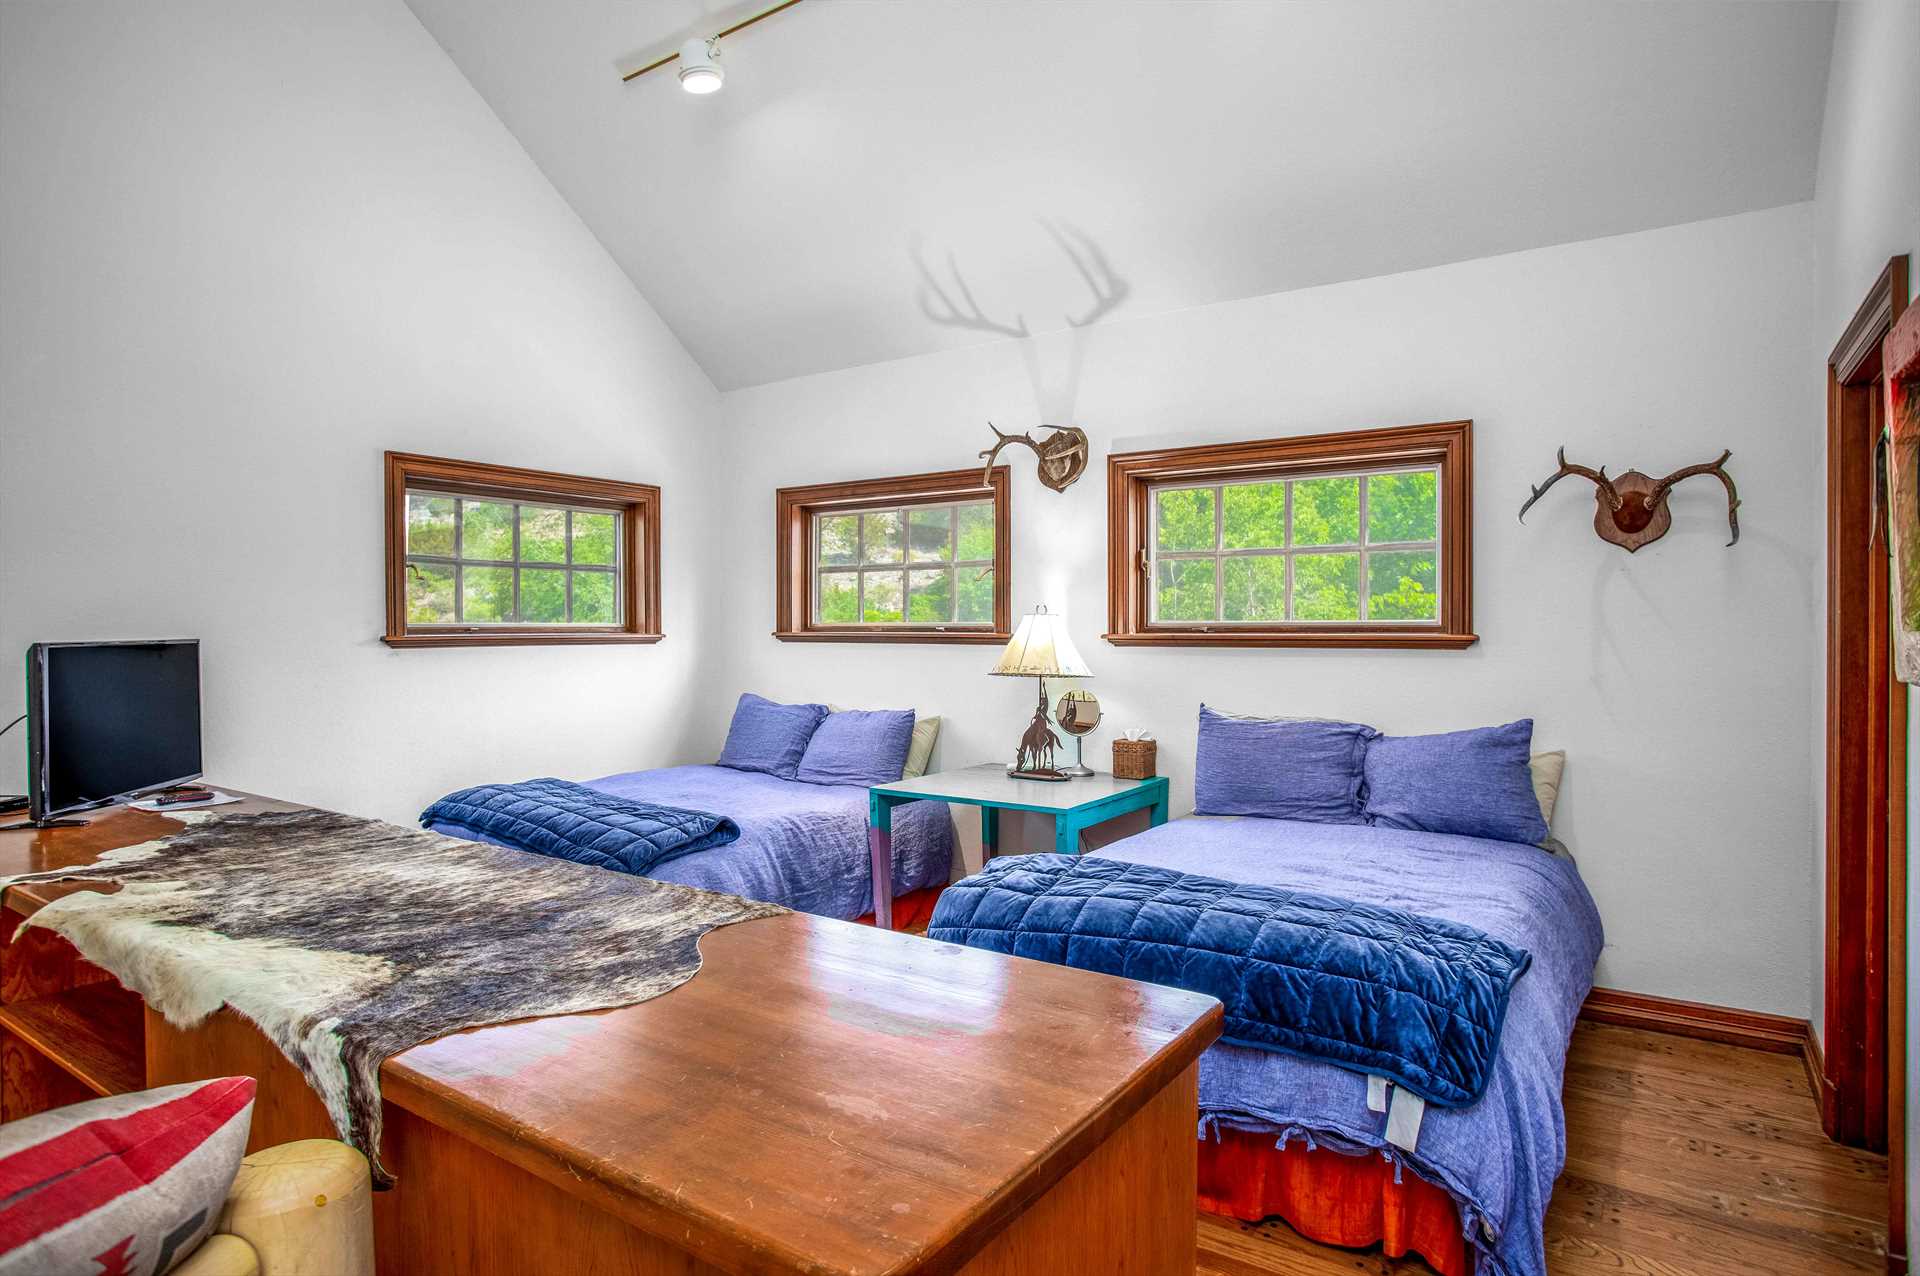                                                 With two queen beds and a comfy double futon (all decked out with fresh linens), the Casita comfortably sleeps up to five people.